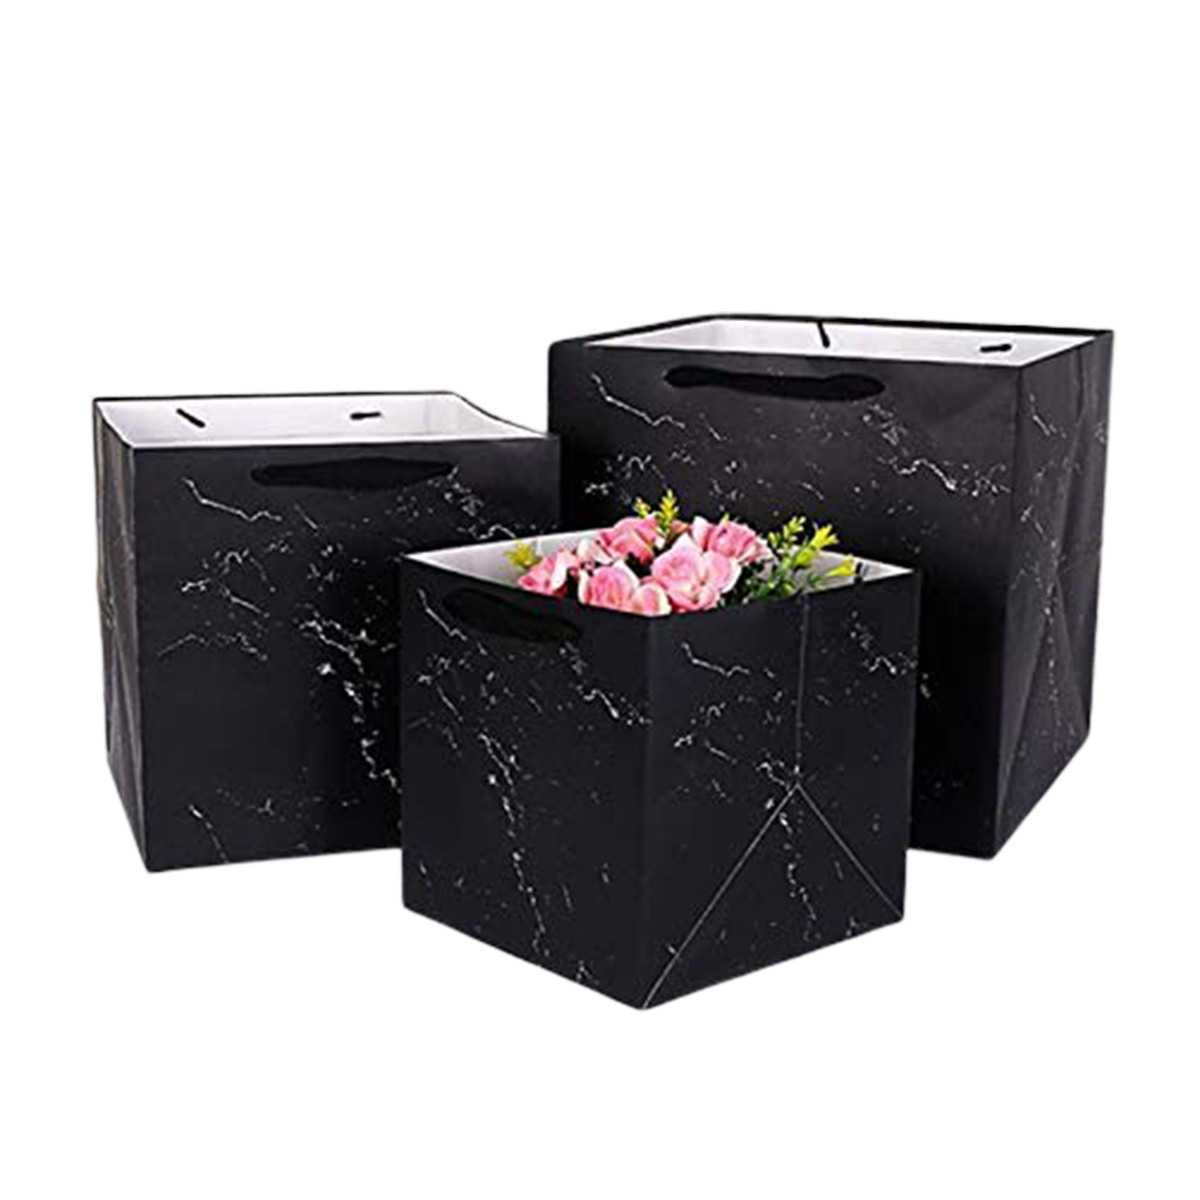 12Pcs Square Marble Design Gift Bags Giveaway Flower Bags Gift Favors - 20x20x20cm Black - Willow